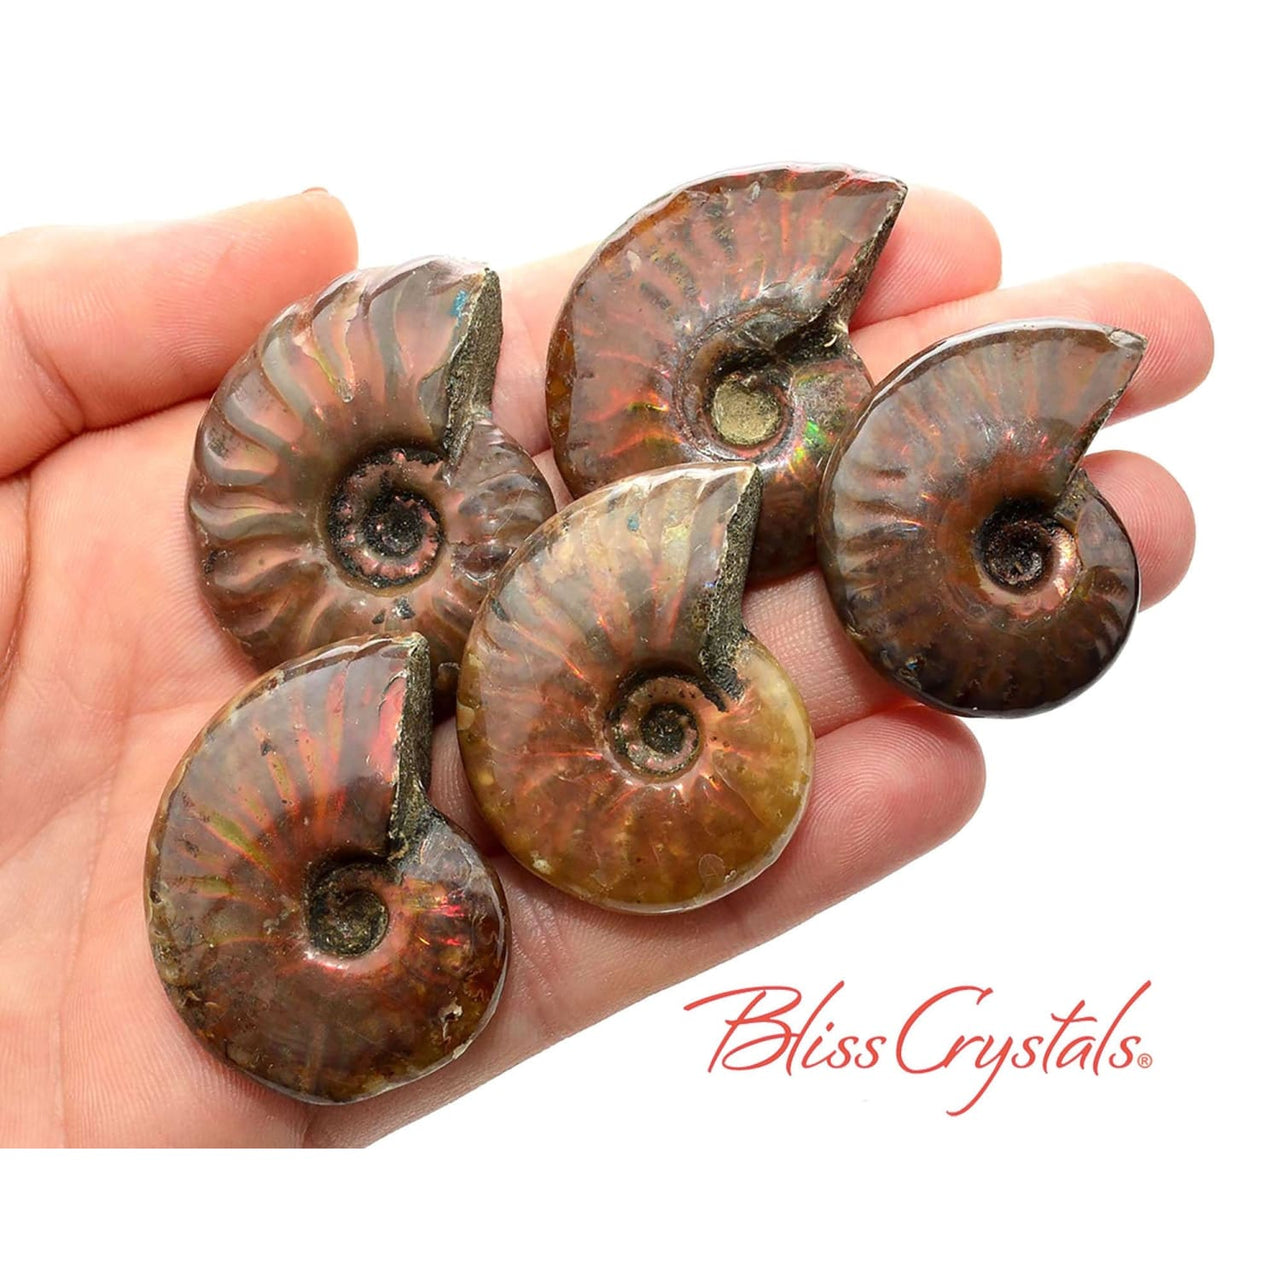 1 Red Fire AMMONITE Opalized Fossil Whole Shell Nautilus 